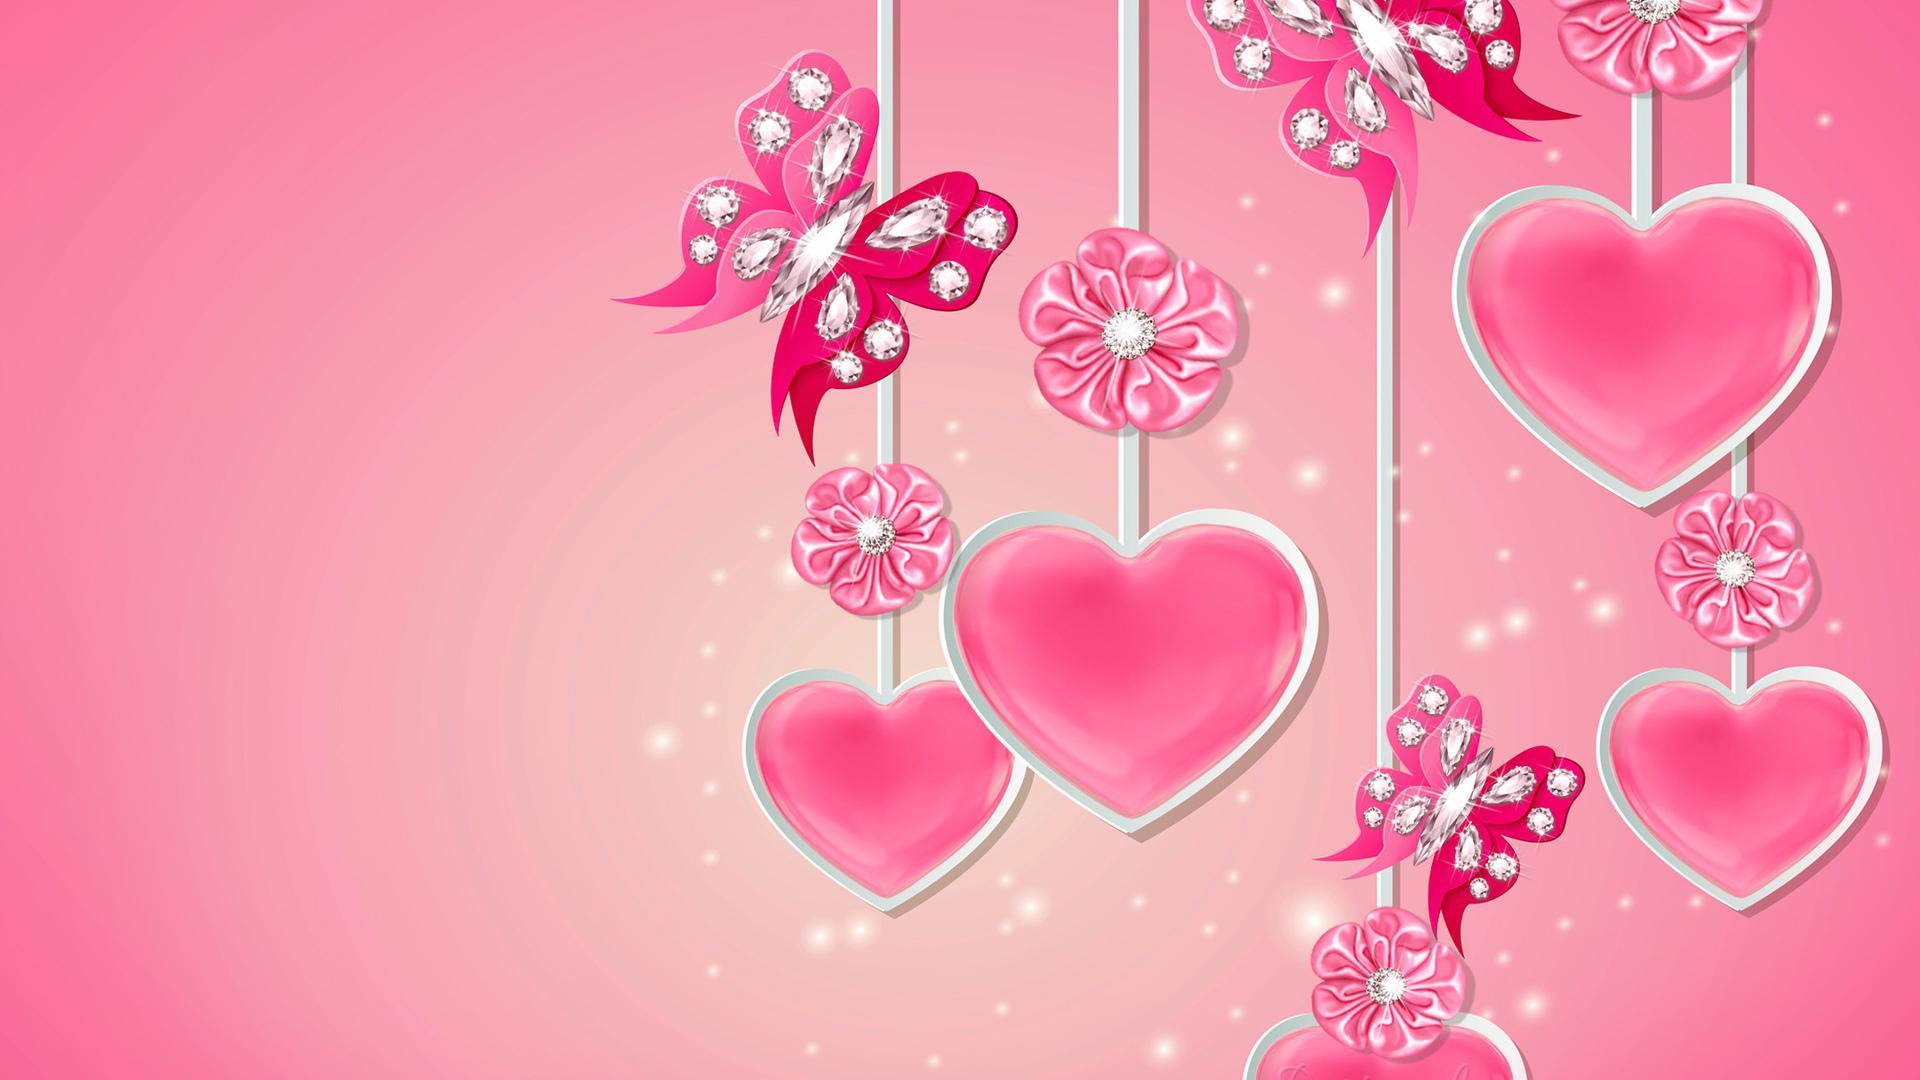 Pink Love Heart Wallpaper (Picture)